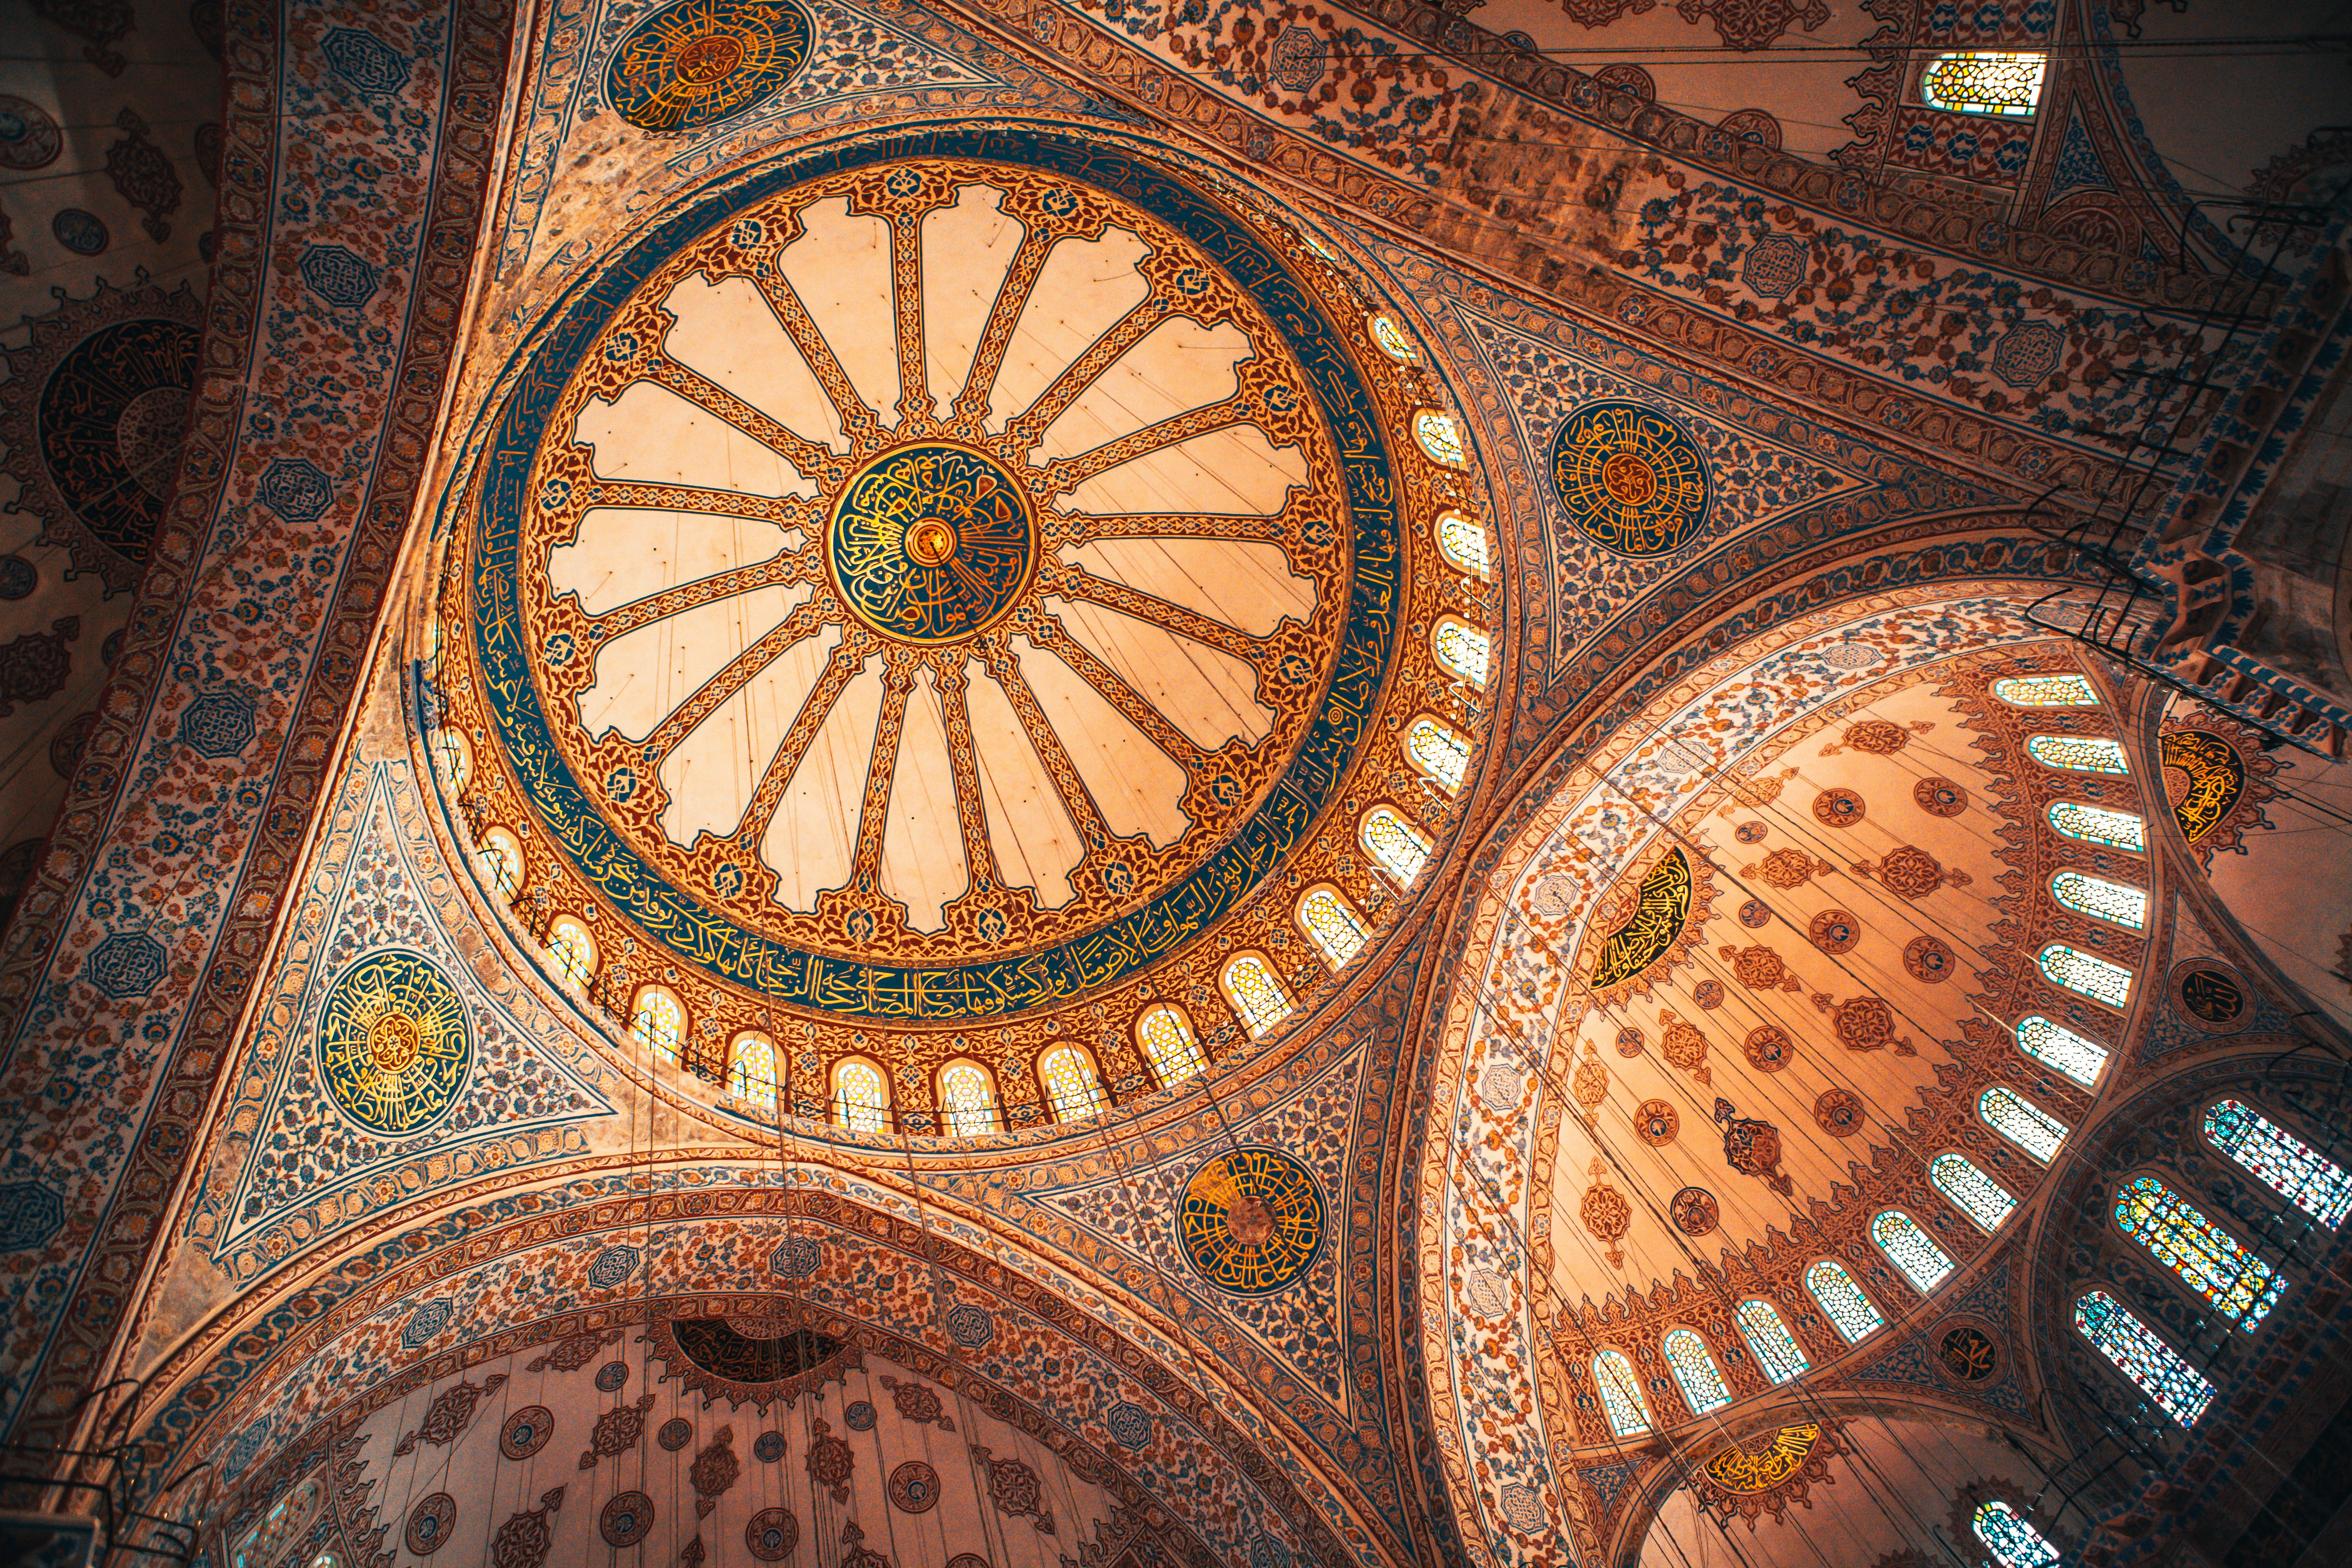 Interior of Sultan Ahmed Mosque Blue Mosque Istanbul, Turkey.